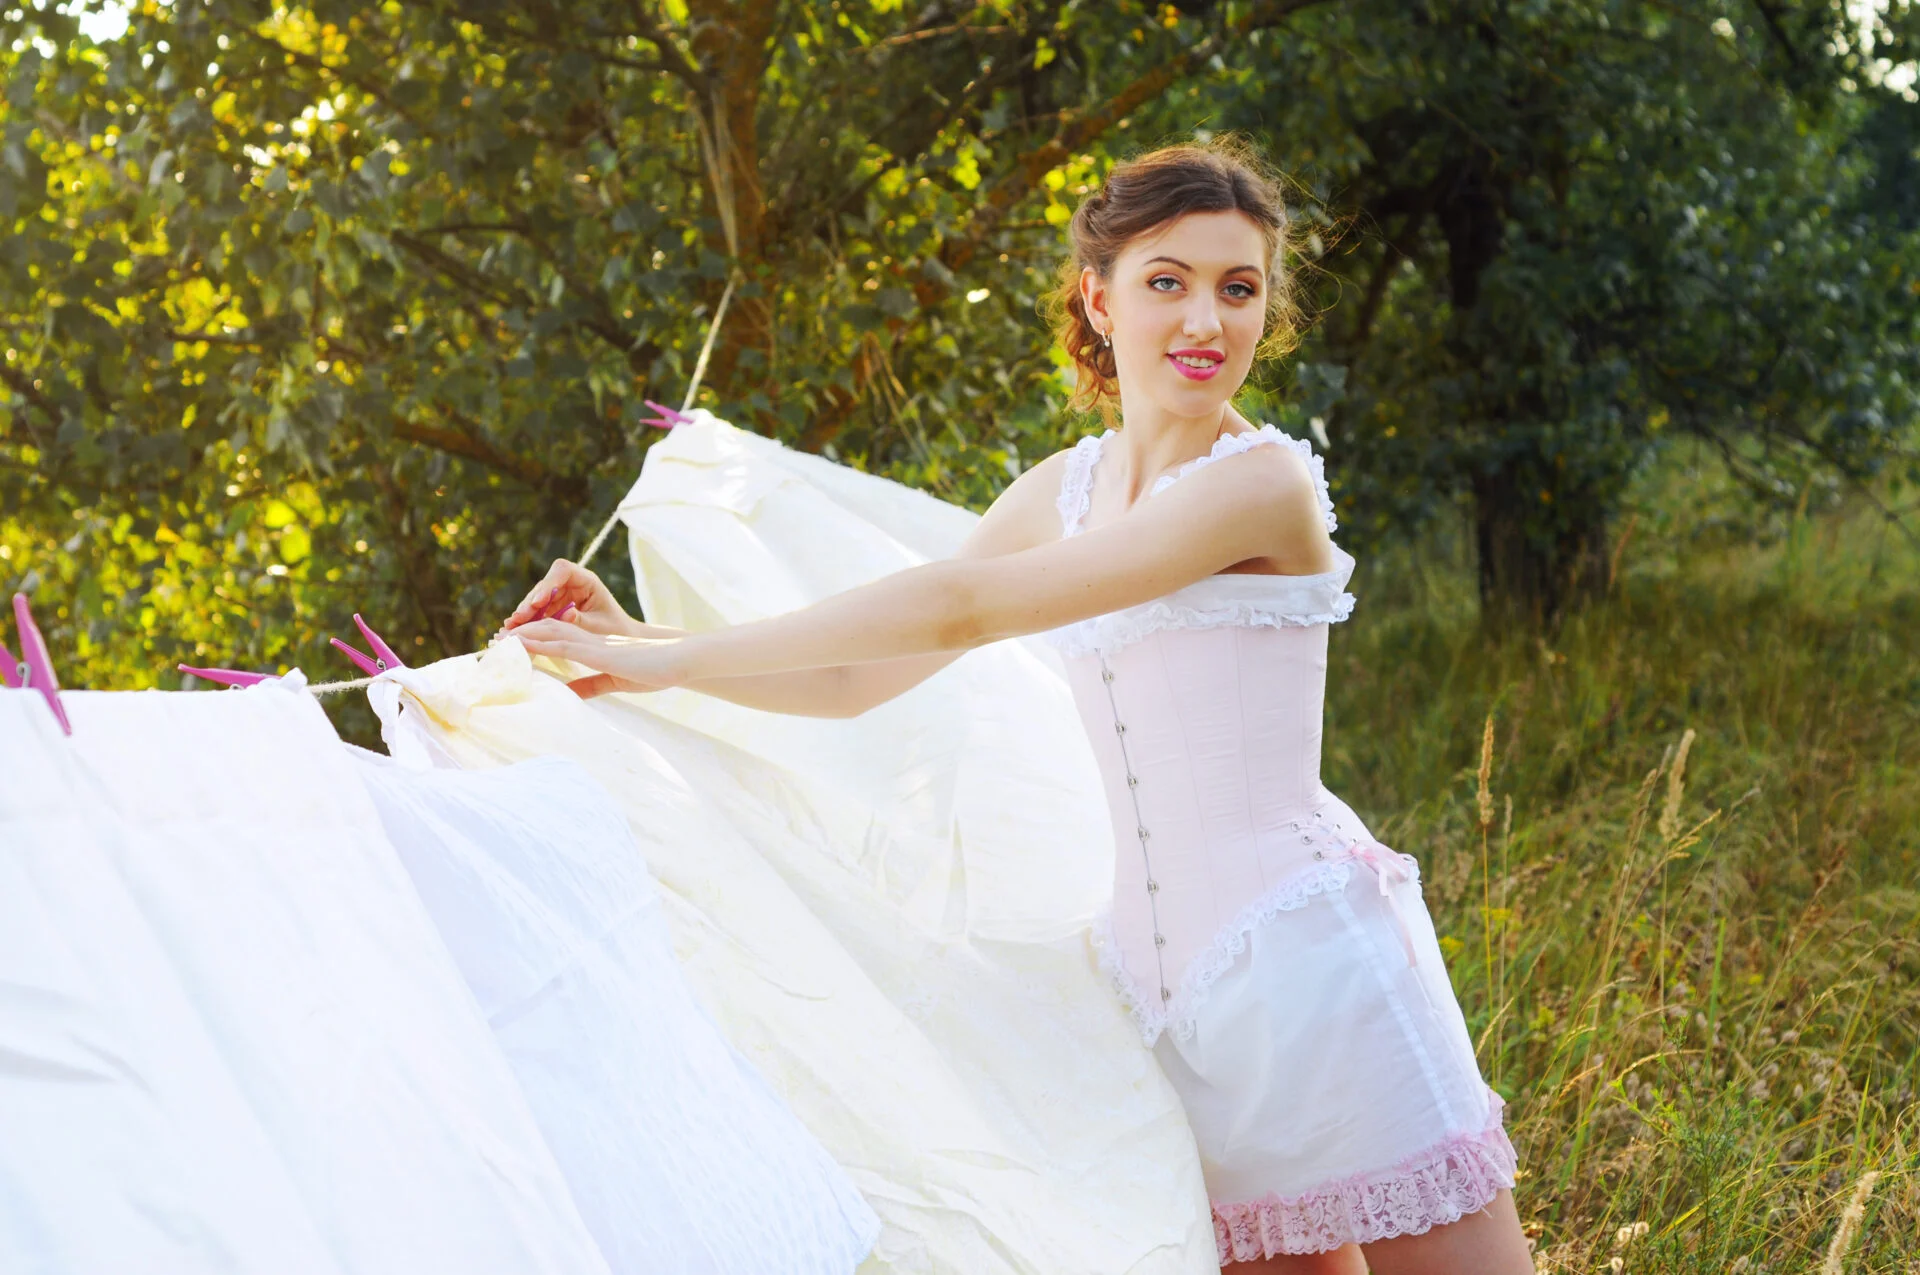 Young attractive woman drying her laundry outdoors